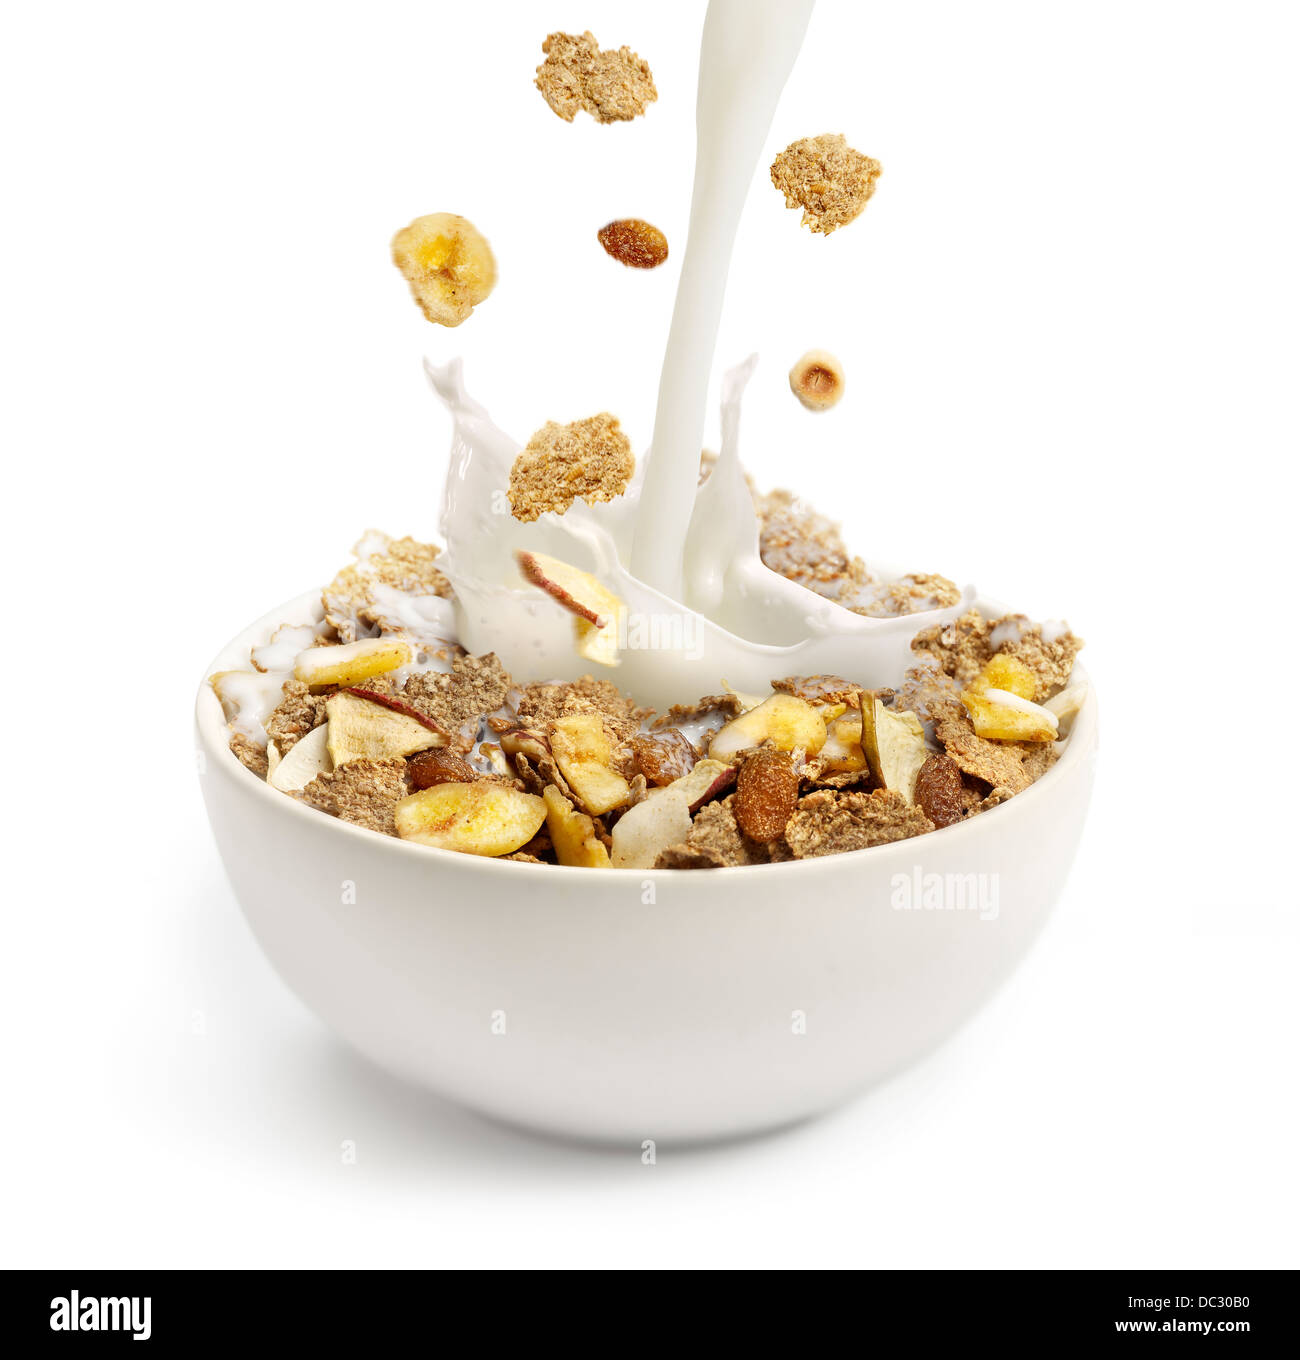 Pouring milk into a bowl with breakfast cereal Stock Photo